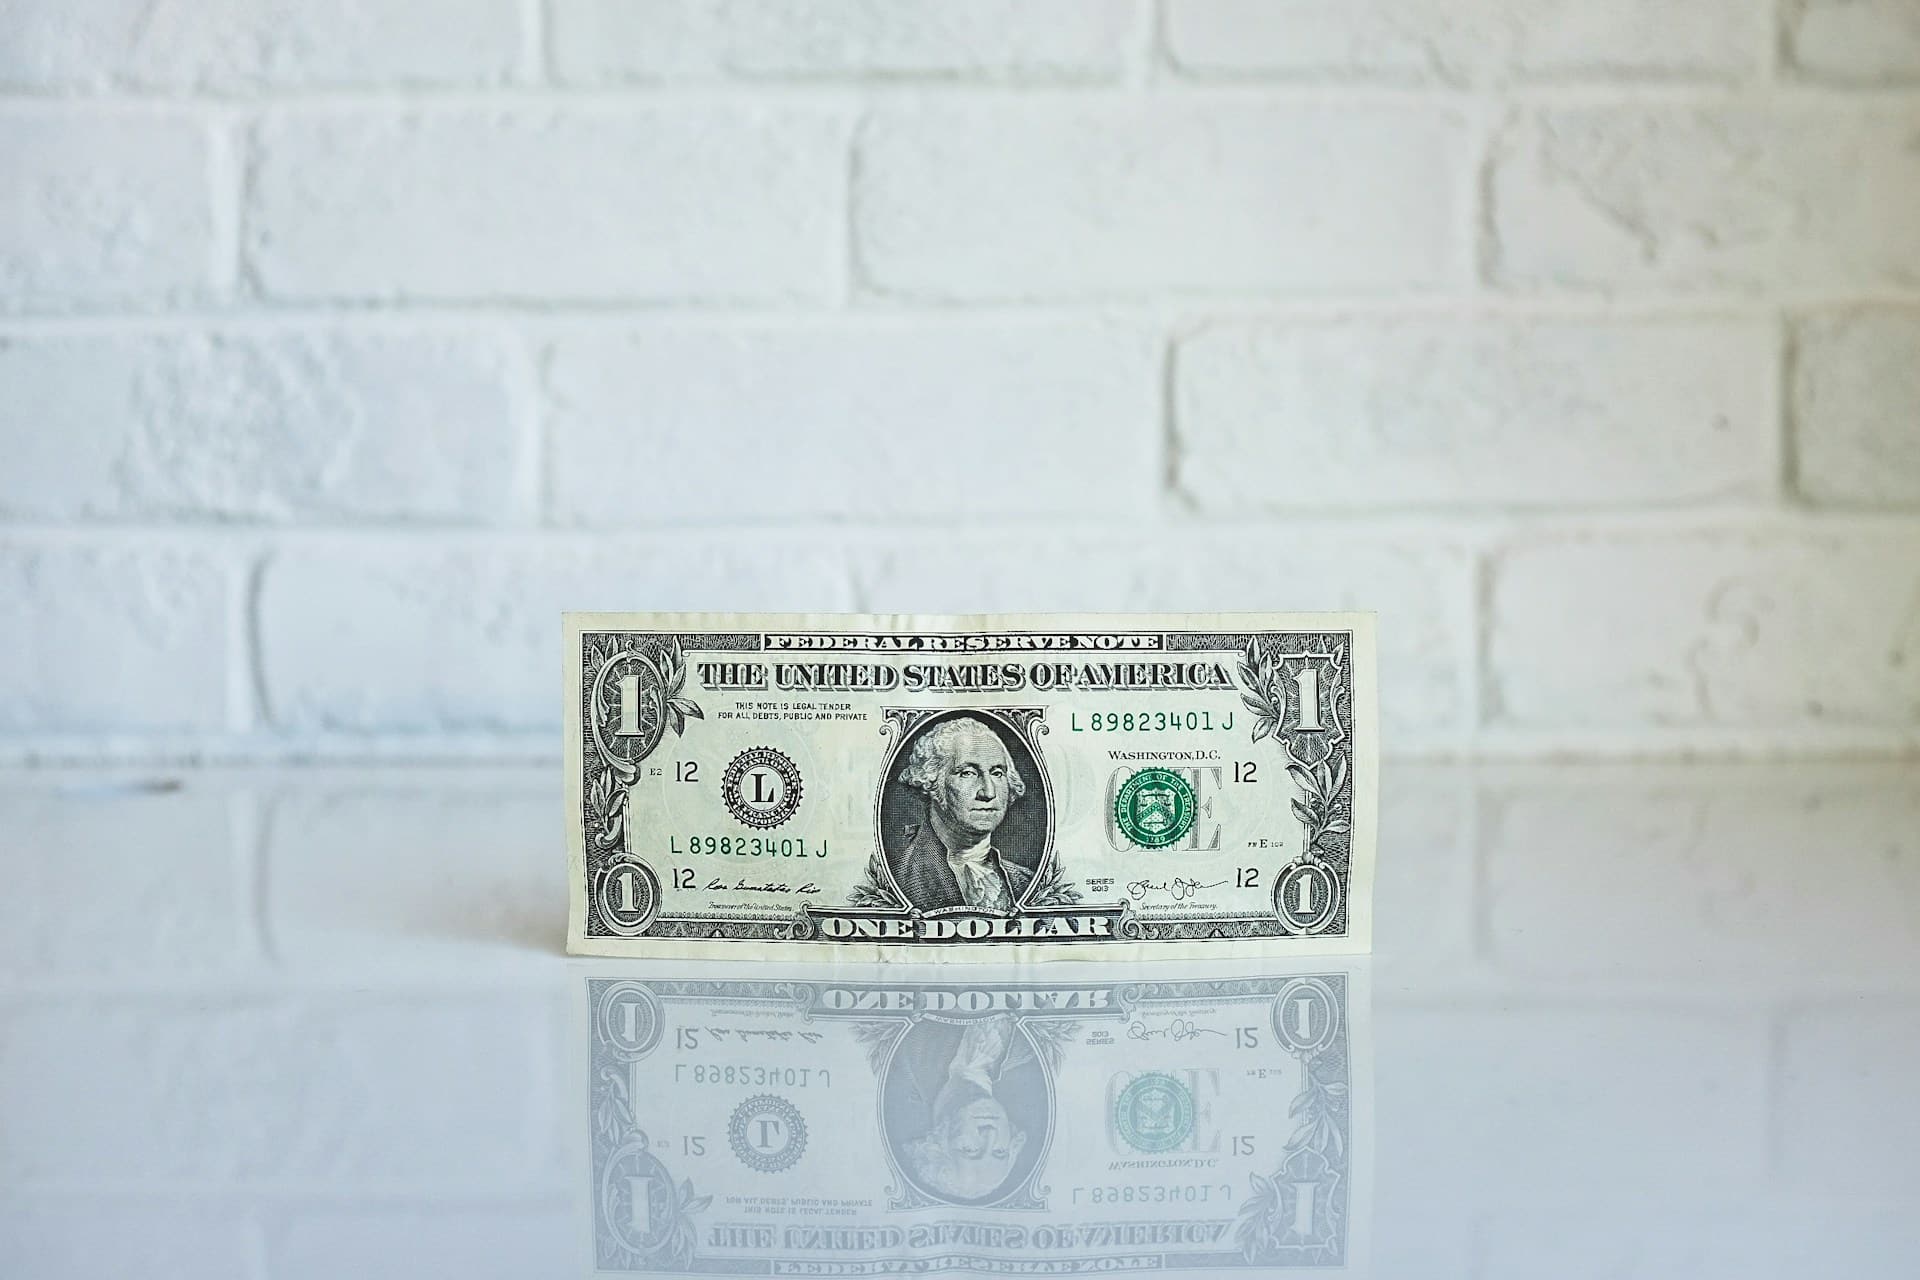 A single dollar bill with George Washington's face on it, against a white brick wall background